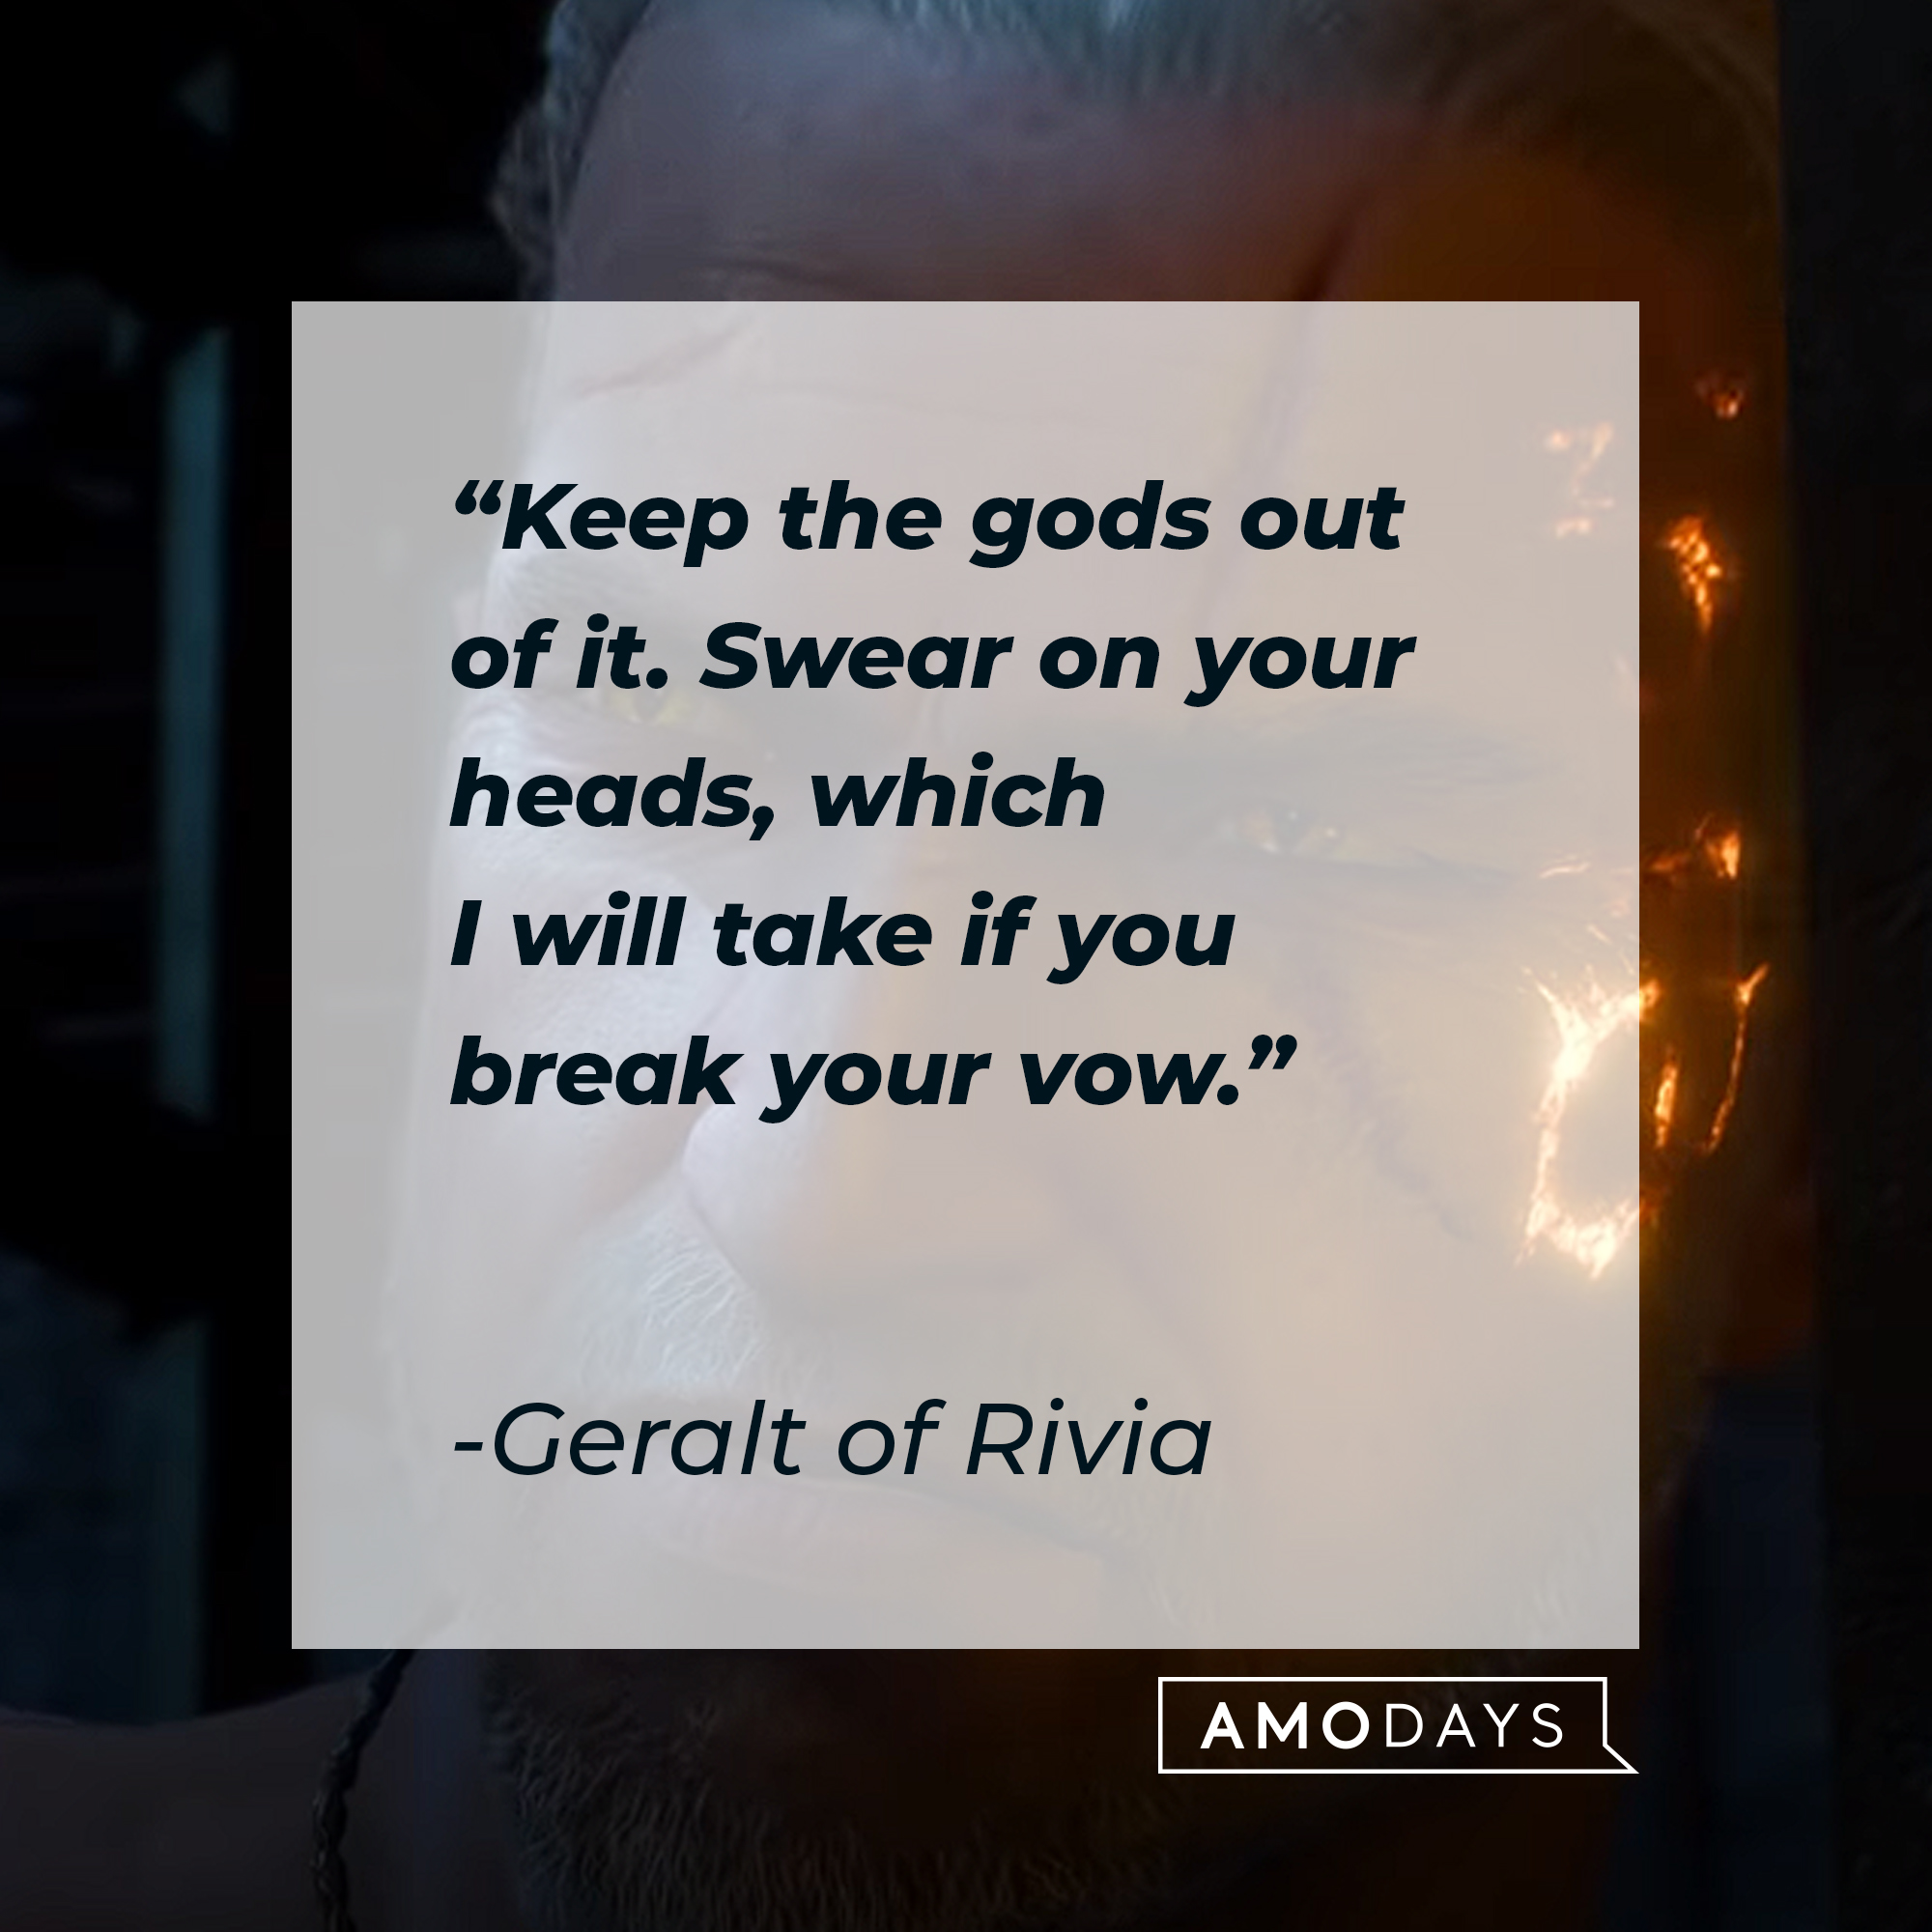 eralt of Rivia from the video game with his quote: "Keep the gods out of it. Swear on your heads, which I will take if you break your vow." | Source: youtube.com/thewitcher